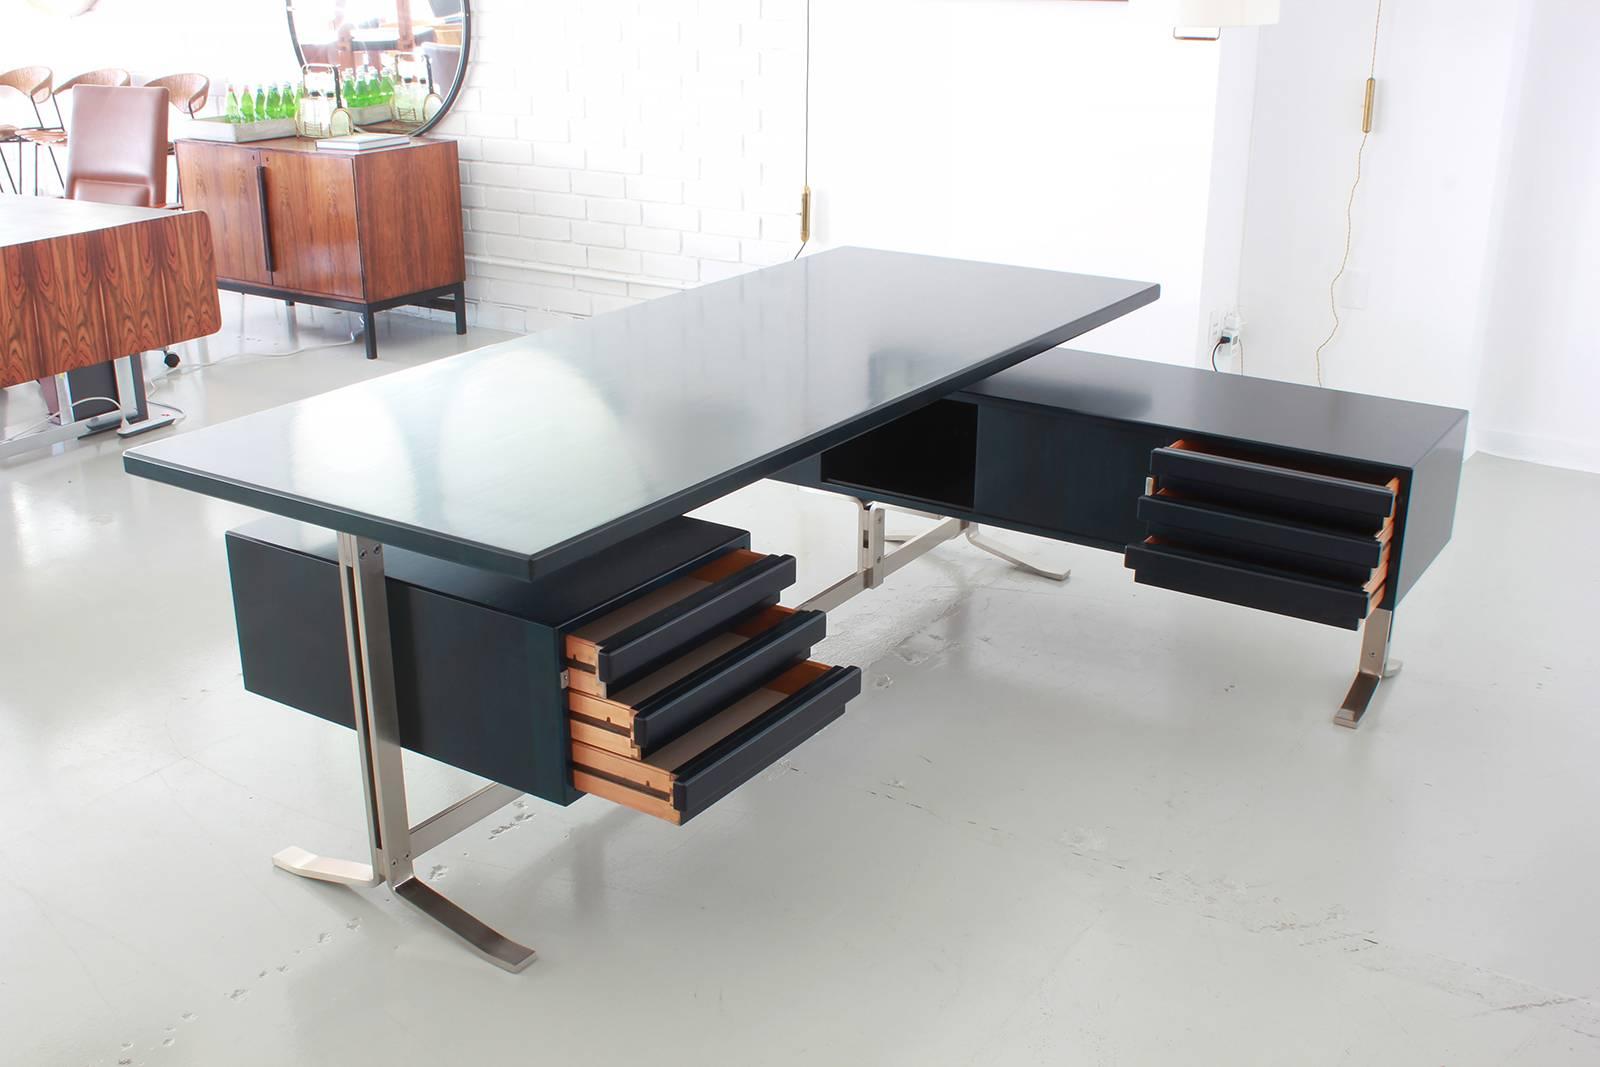 Handsome executive desk by Gianni Moscatelli for Forma Nova. Newly refinished in a dark ebony stain with polished finish. Desk surface rests on flat chromed steel legs with floating drawers on either side. Large work space and extremely impressive!